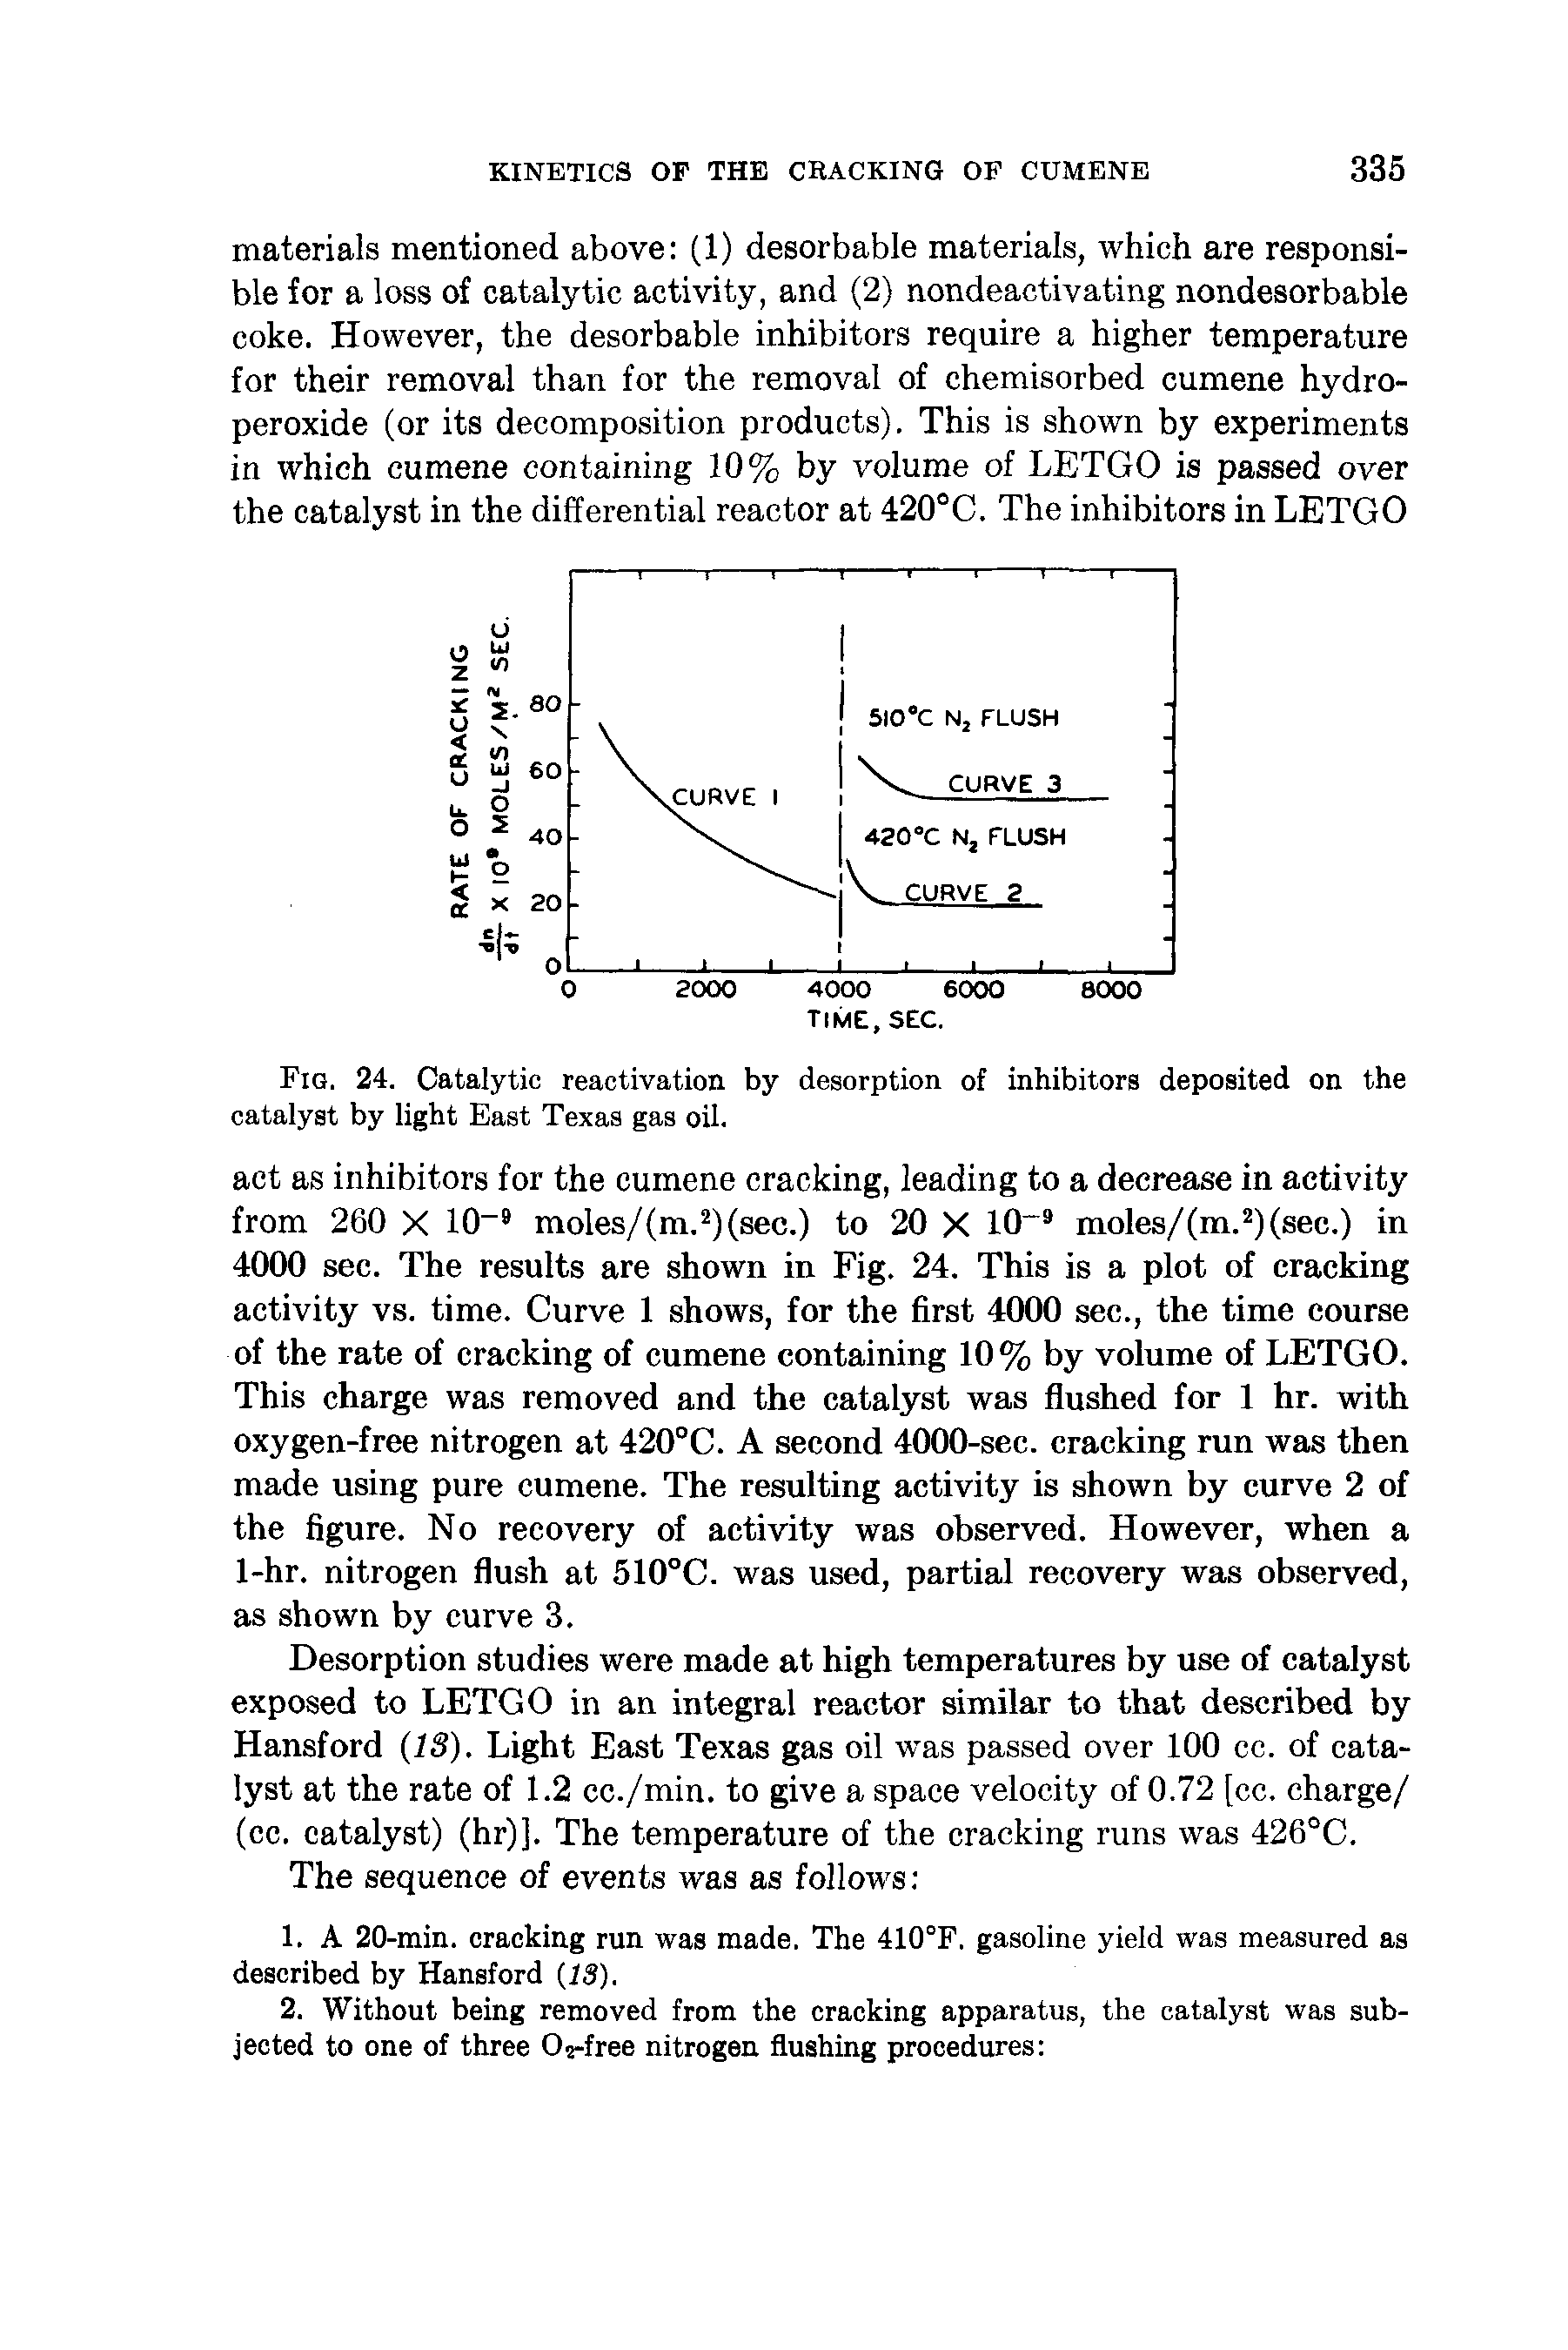 Fig. 24. Catalytic reactivation by desorption of inhibitors deposited on the catalyst by light East Texas gas oil.